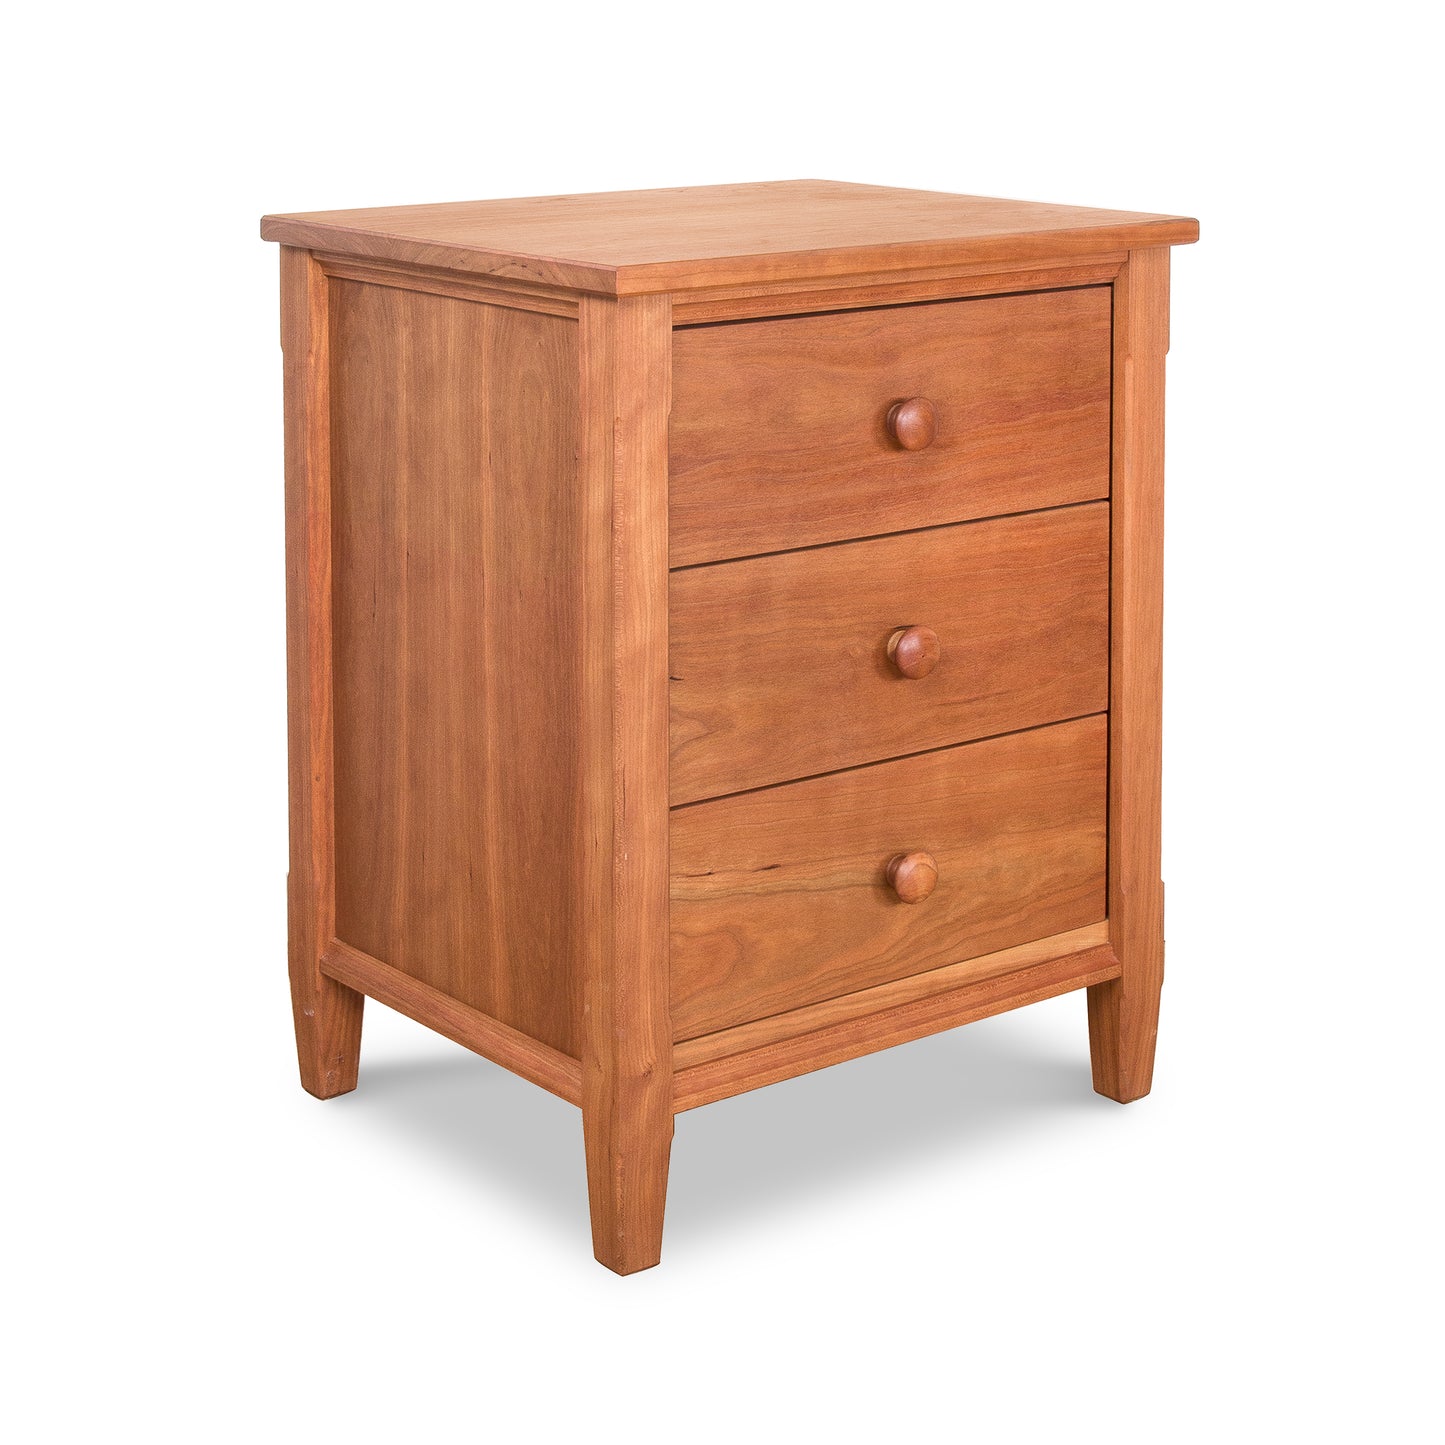 A wooden three-drawer Maple Corner Woodworks Vermont Shaker Nightstand made of polished light brown wood, featuring round handles on each drawer, isolated on a white background.